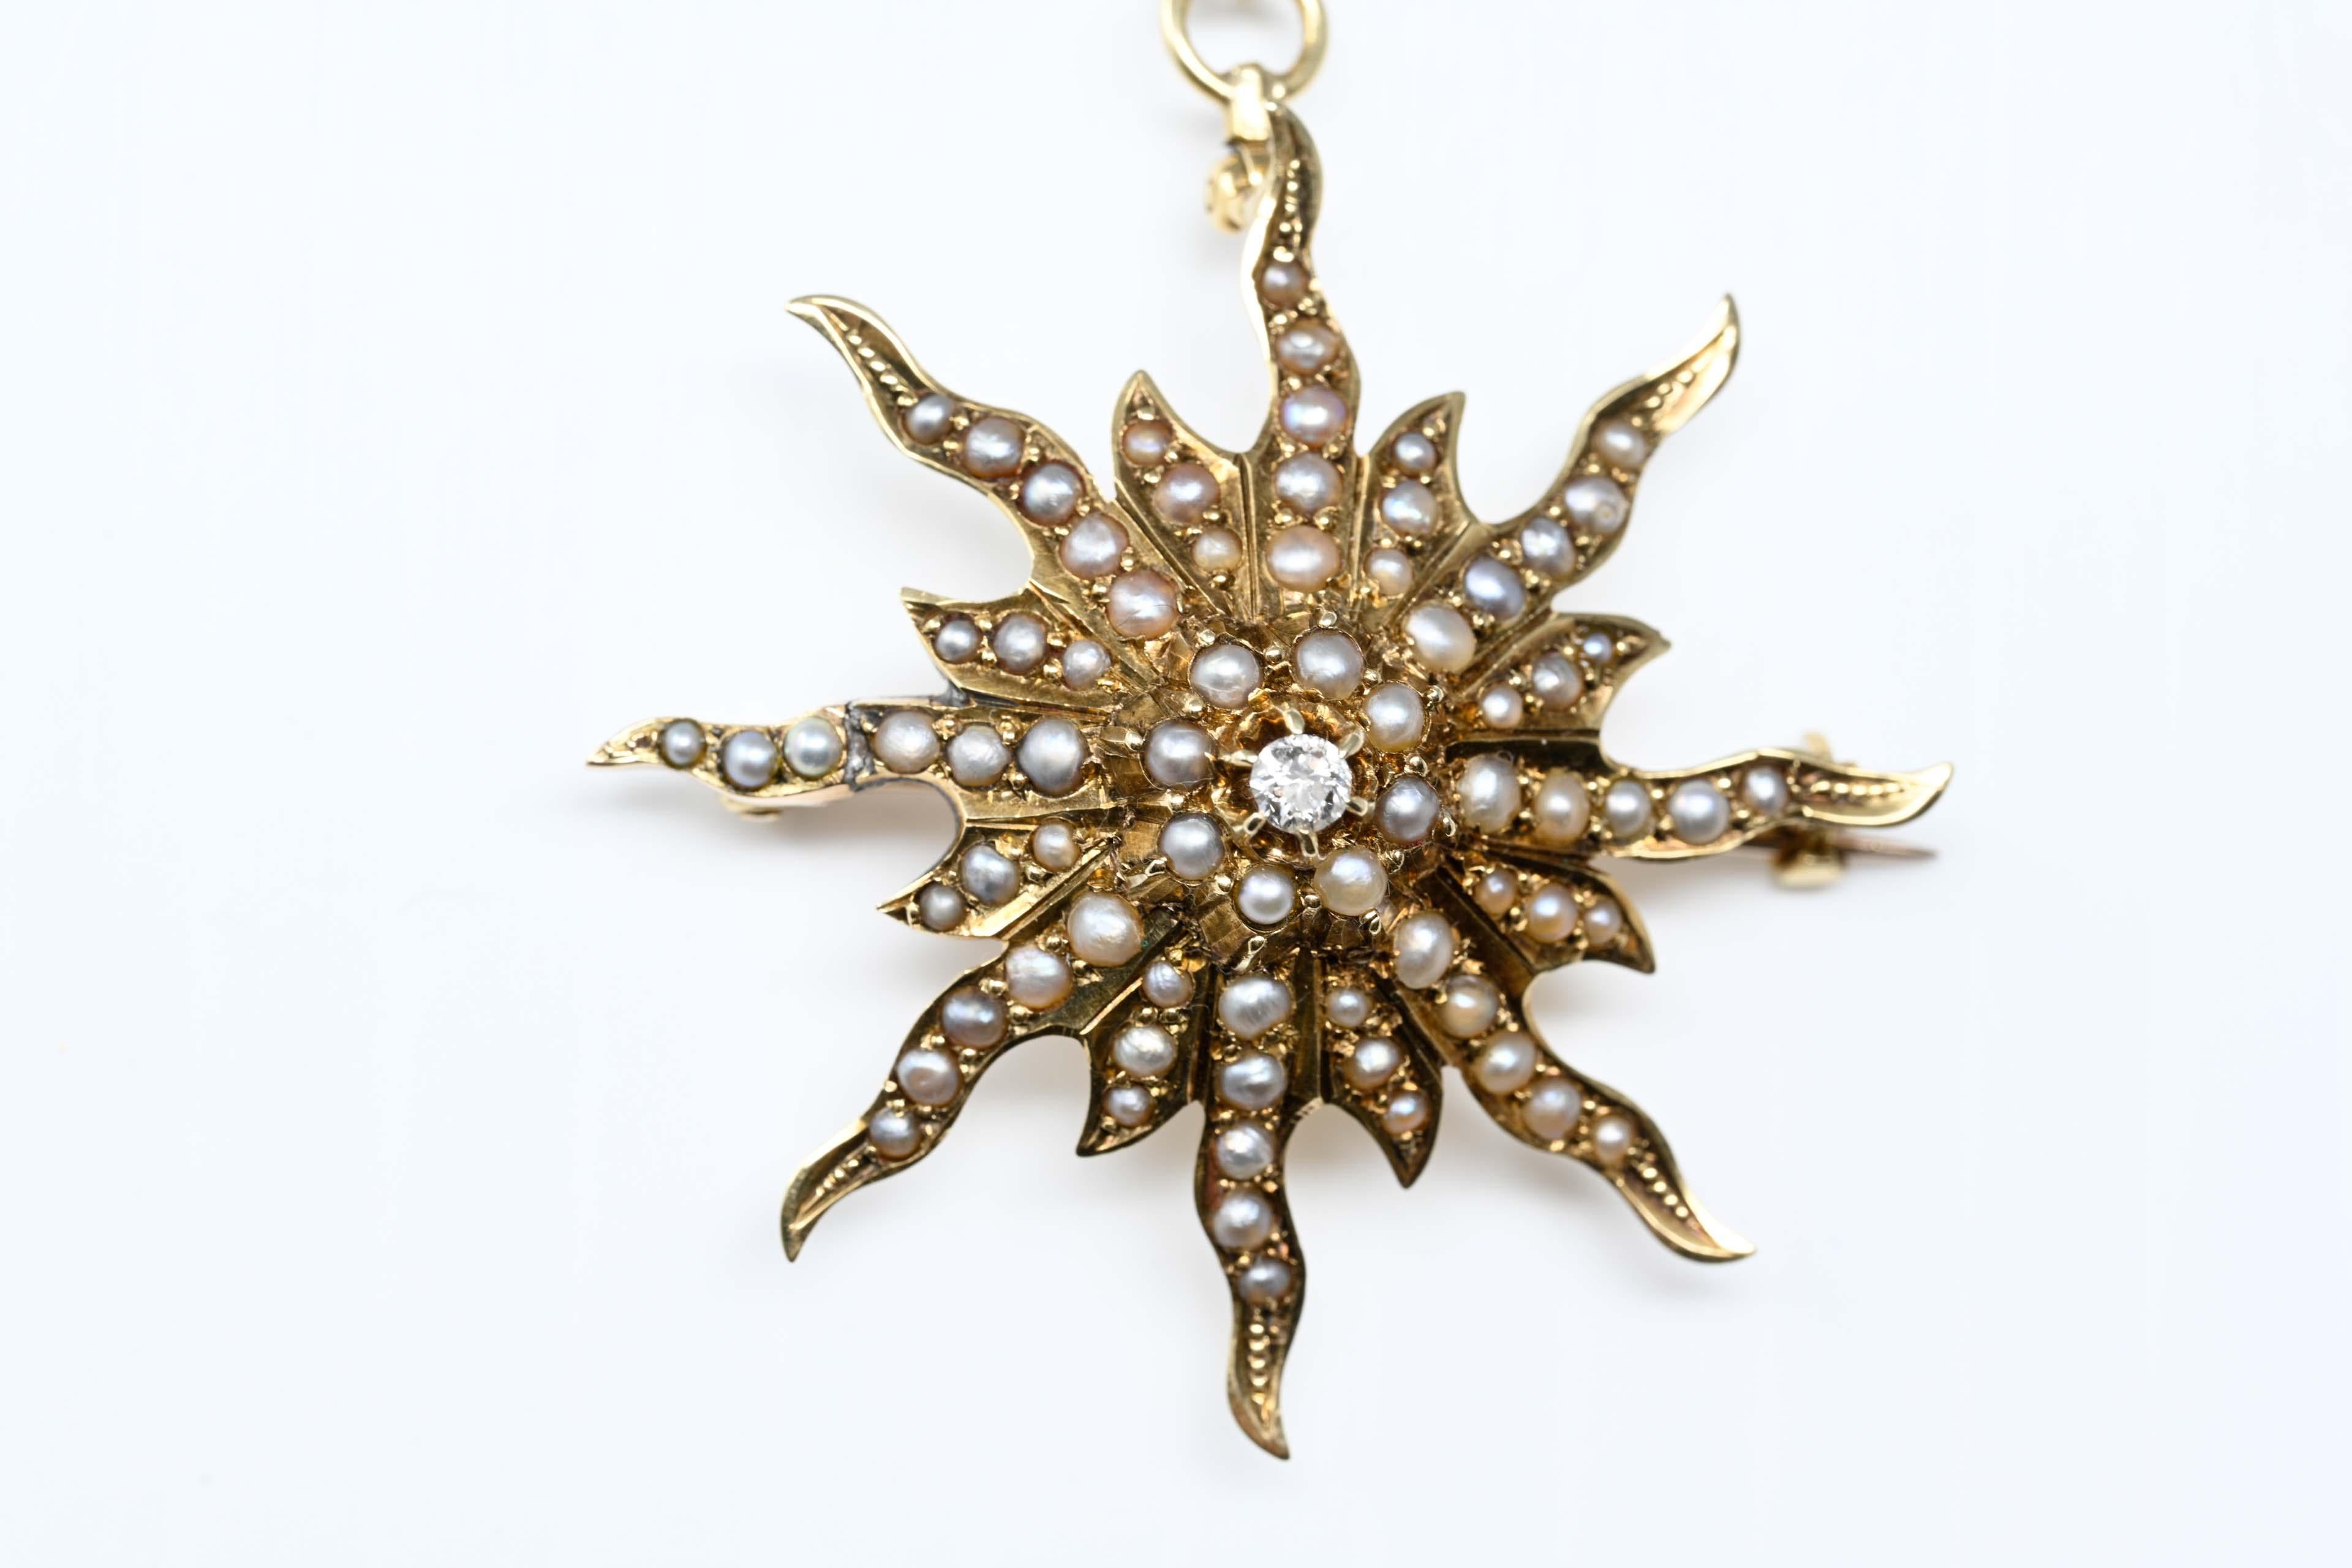 Antique 14k yellow gold star pendant set with central .05ct diamond and 64 genuine seed pearls. It is stamped 14k on the back. Measures 45mm x 38mm, weighs 7 grams preowned and in good condition.